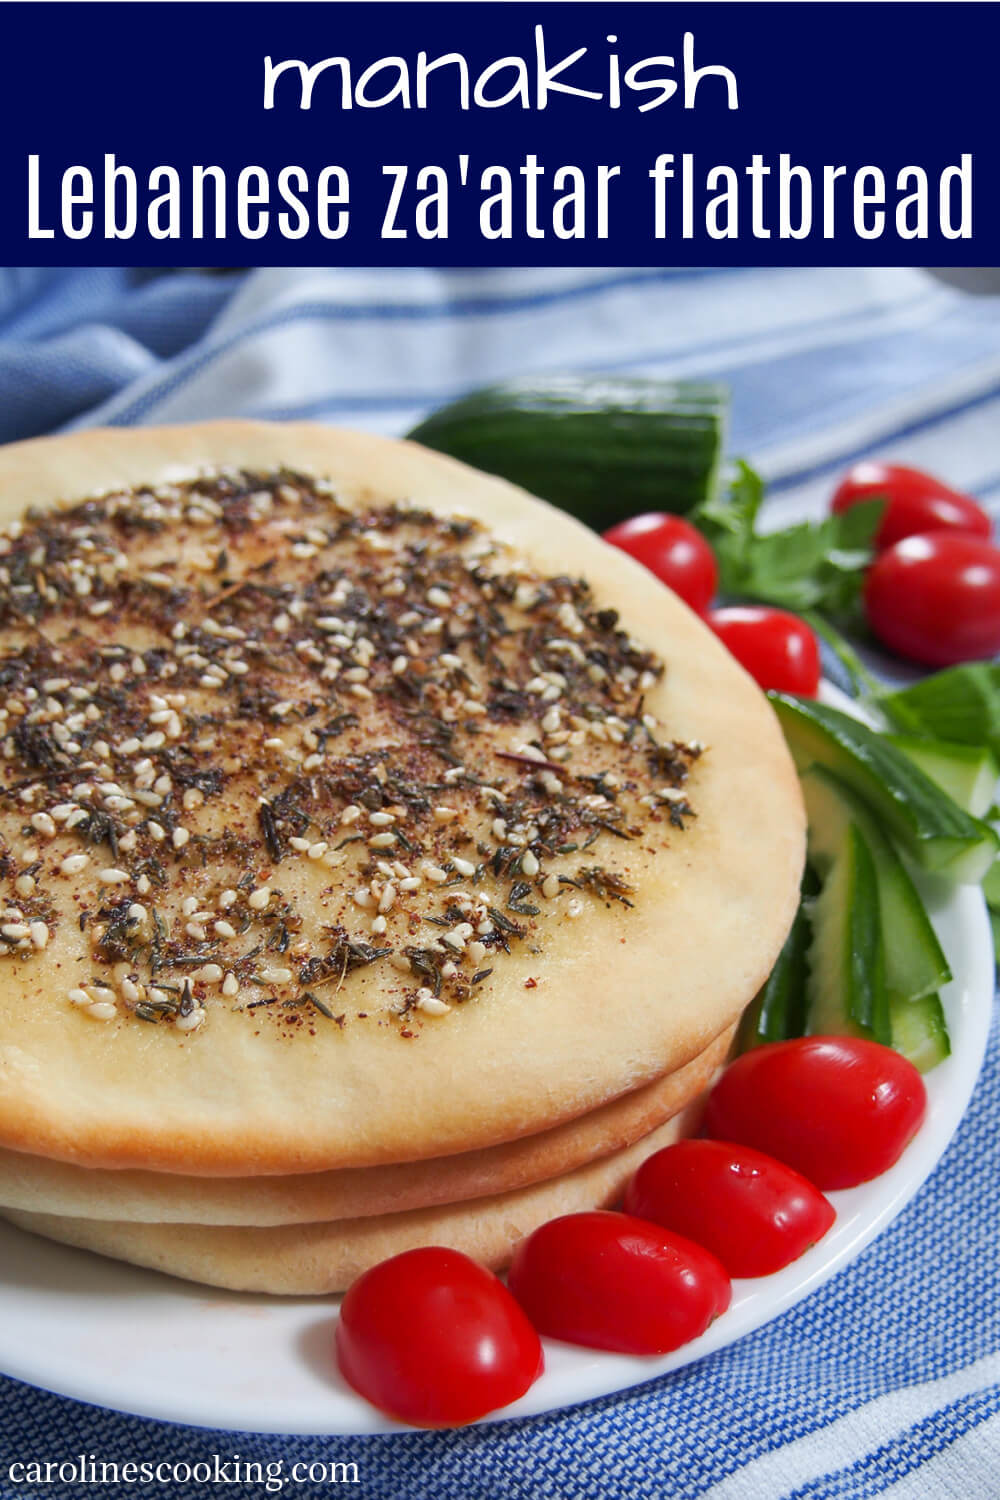 Manakish za'atar are delicious flatbread from the Levantine region topped with olive oil and za'atar.  The oil and herbs add lots of aromatic flavor, making this bread perfect to snack on.  #flatbread #zaatar #middleeasternbread #lebanesefood